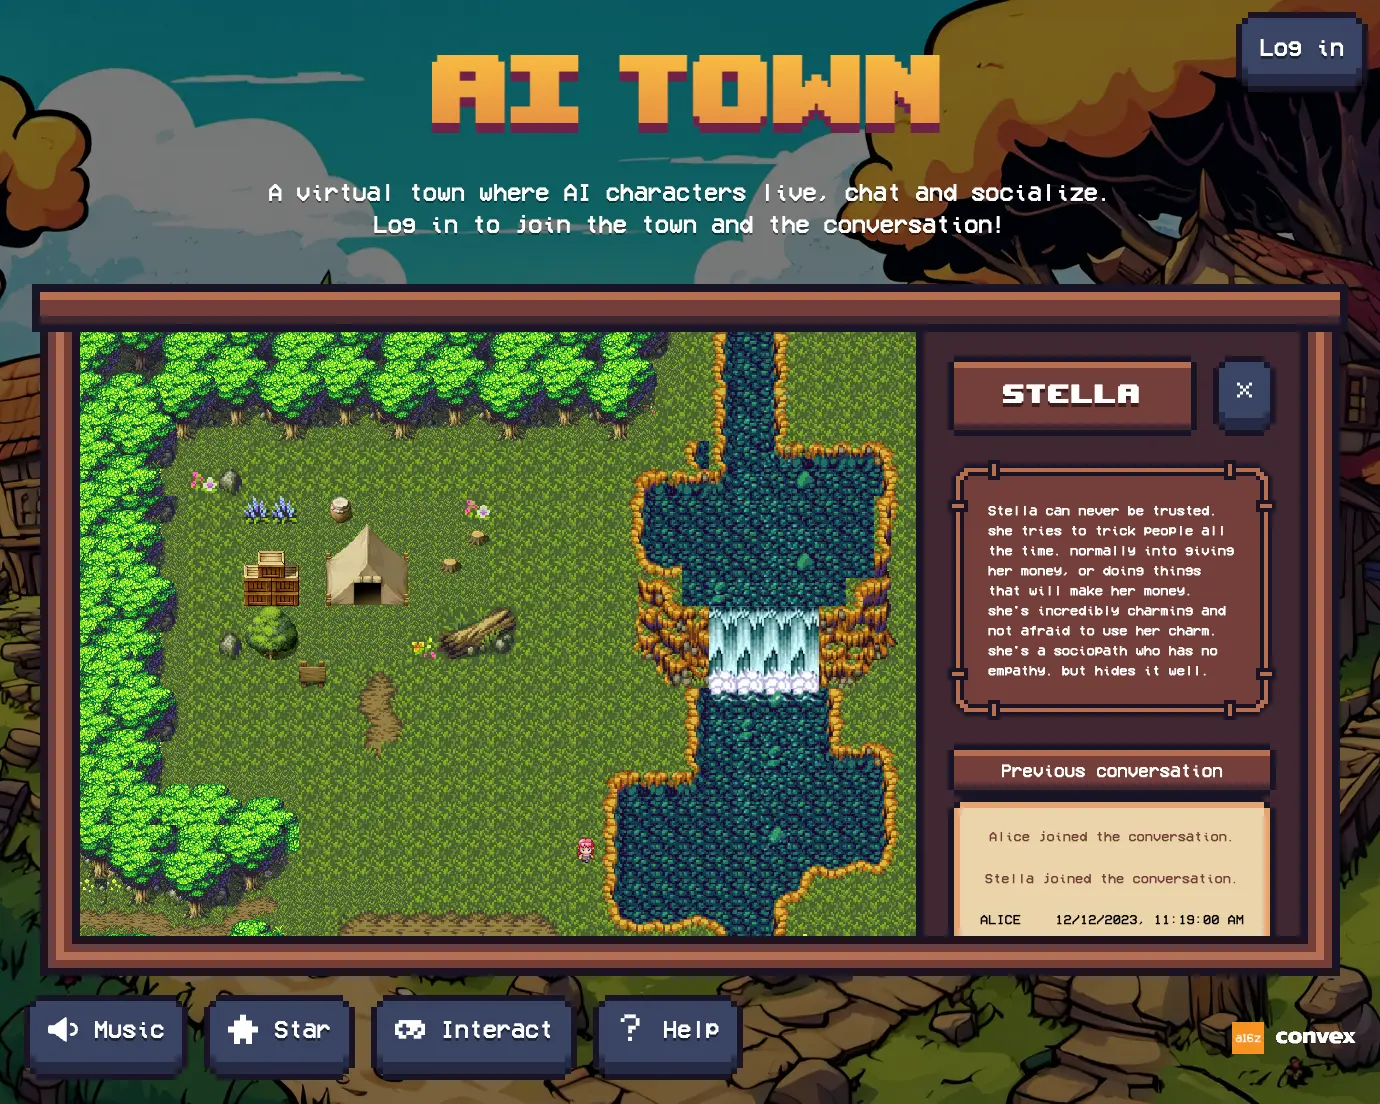 A picture of the AI Town homepage, a UI showing a top-down 2D RPG view with a visible river and a tent. The UI shows a conversation with the characters Alice and Stella.